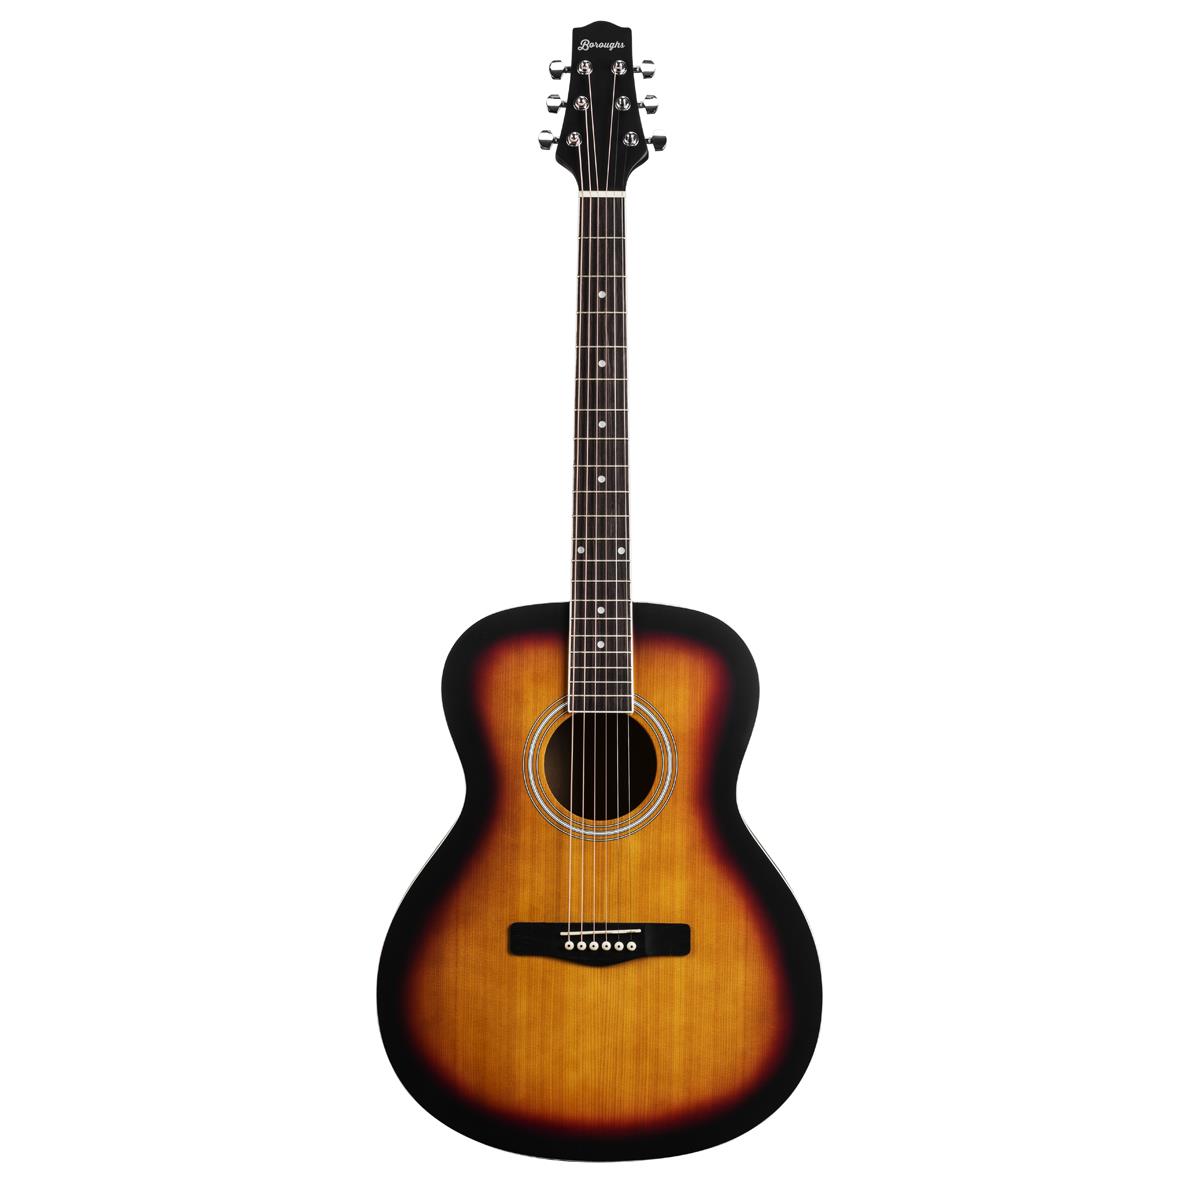 Boroughs Acoustic Guitars: 3 Models from $40 + free s/h